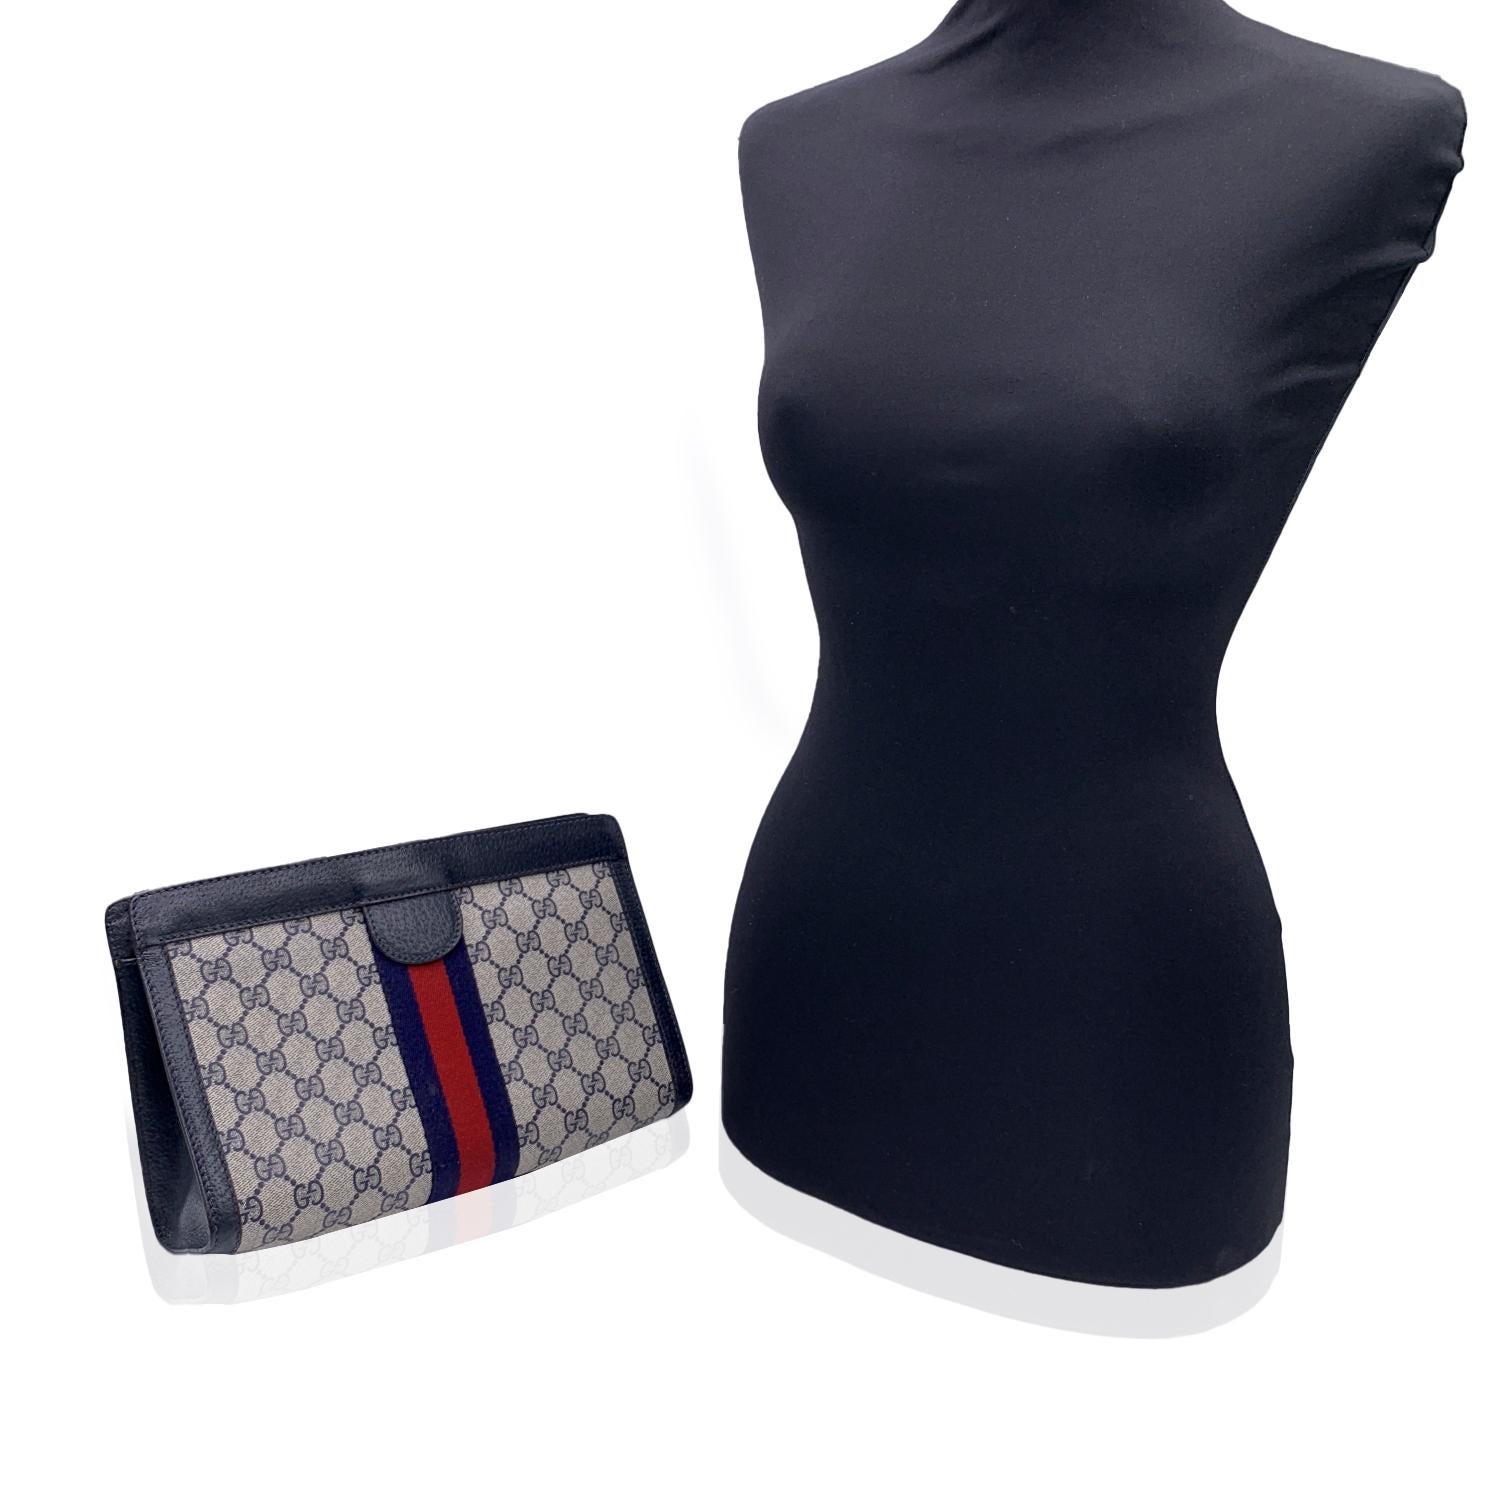 Gucci Vintage Blue Monogram Canvas Cosmetic Bag Clutch with Stripes. Blue Monogram Canvas with Genuine Leather trim. Blue/Red/blue stripes around the bag. Upper hook and loop closure. Blue lining. 